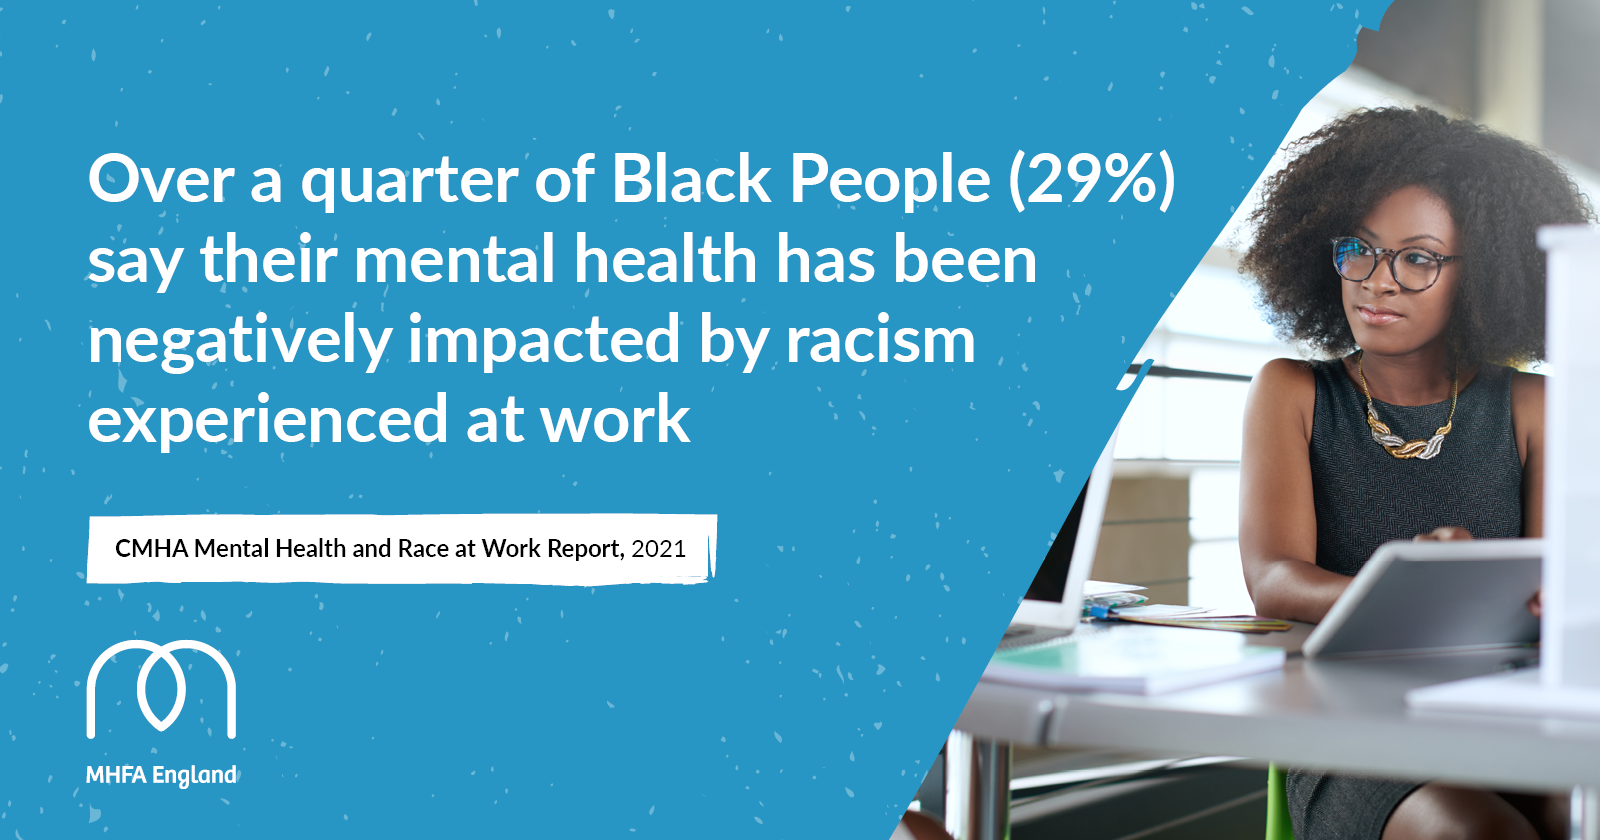 Over a quarter of black people say their mental health has been negatively impacted by racism experienced at work